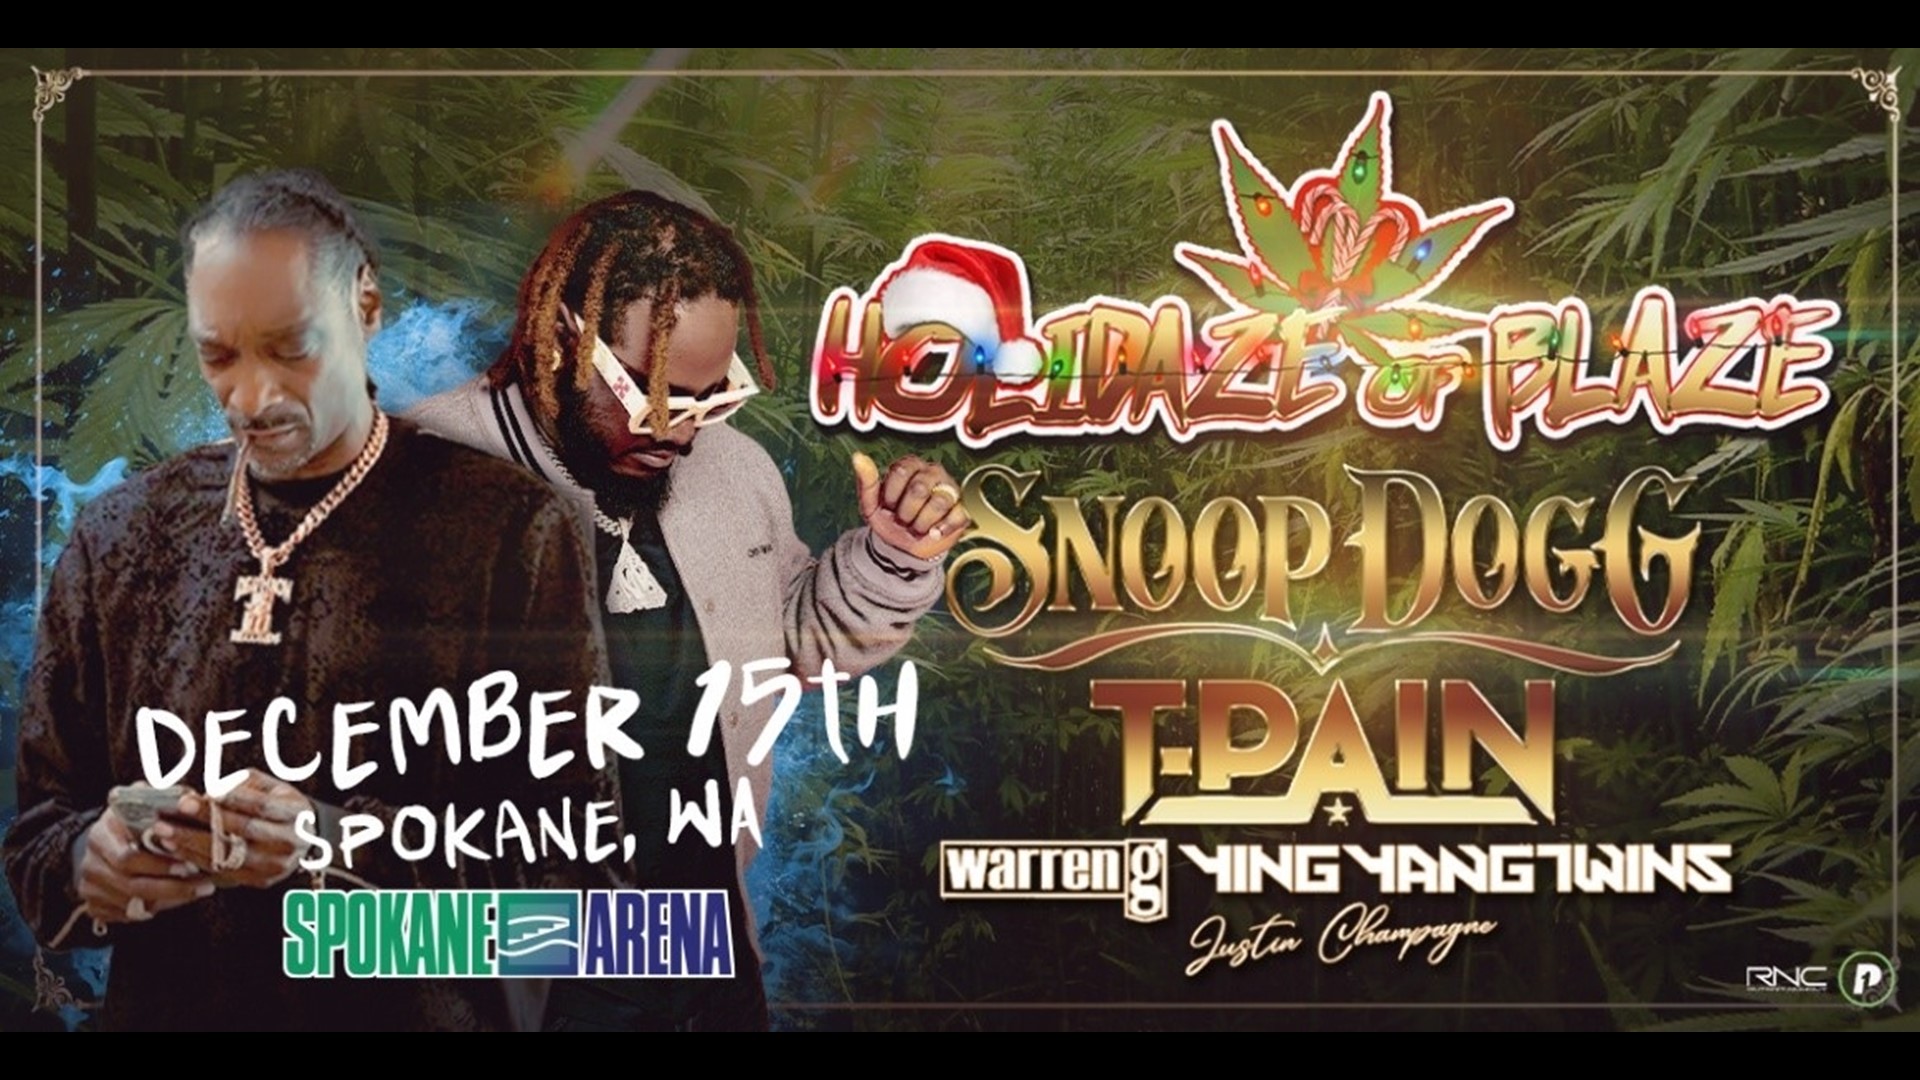 Snoop Dogg will bring his Holidaze of Blaze show to Spokane Arena on December 15.